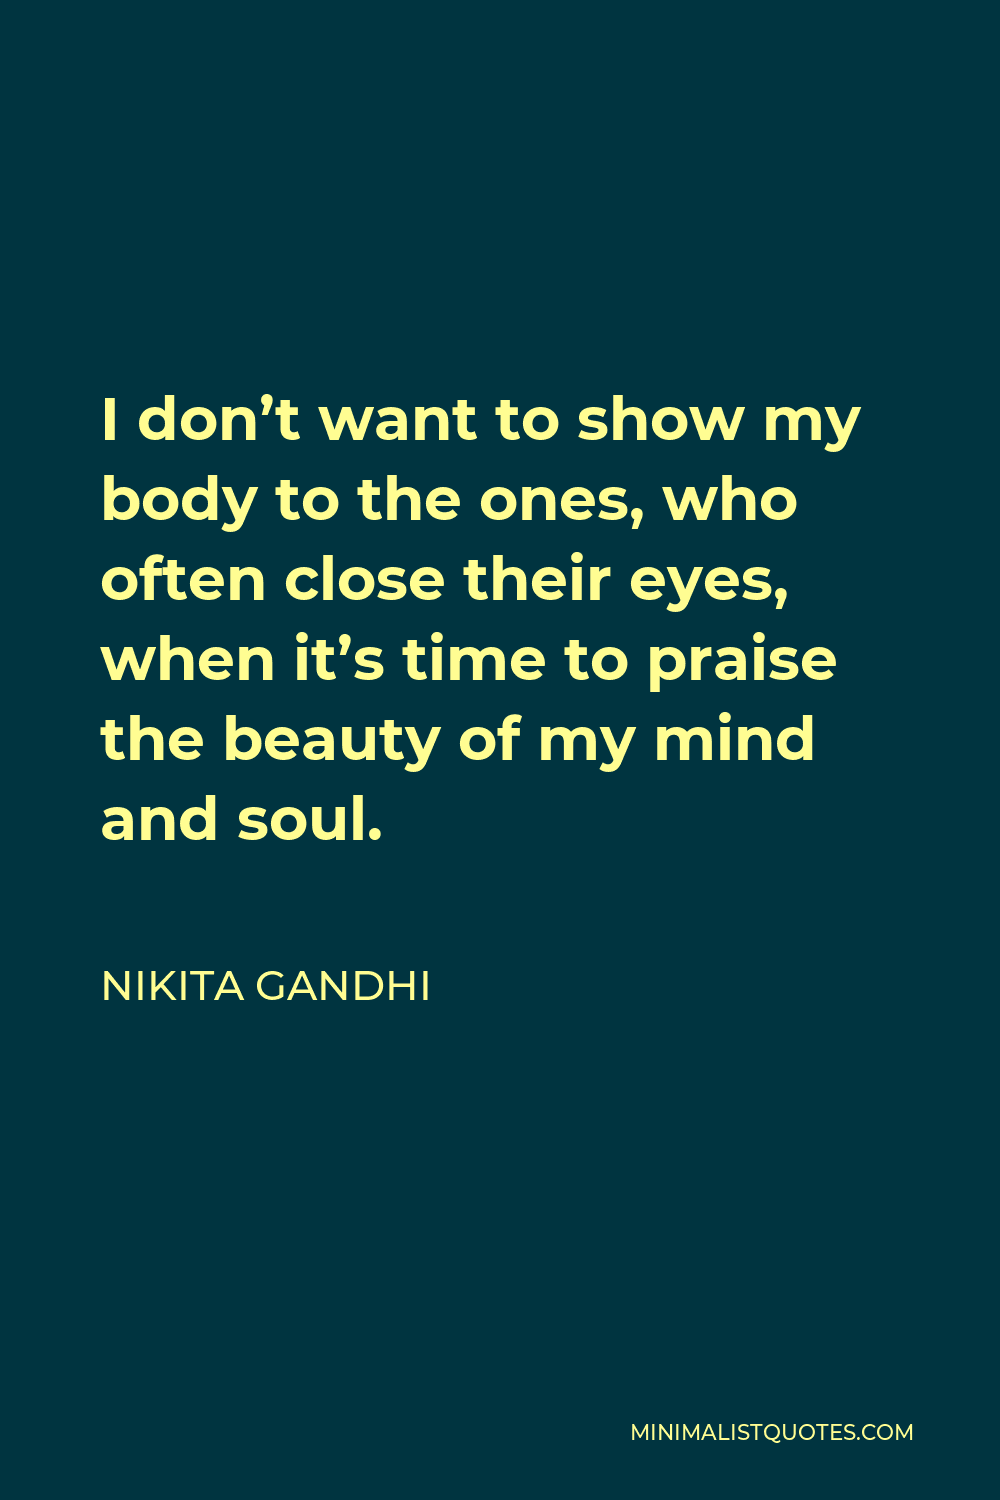 Nikita Gandhi Quote - I don’t want to show my body to the ones, who often close their eyes, when it’s time to praise the beauty of my mind and soul.